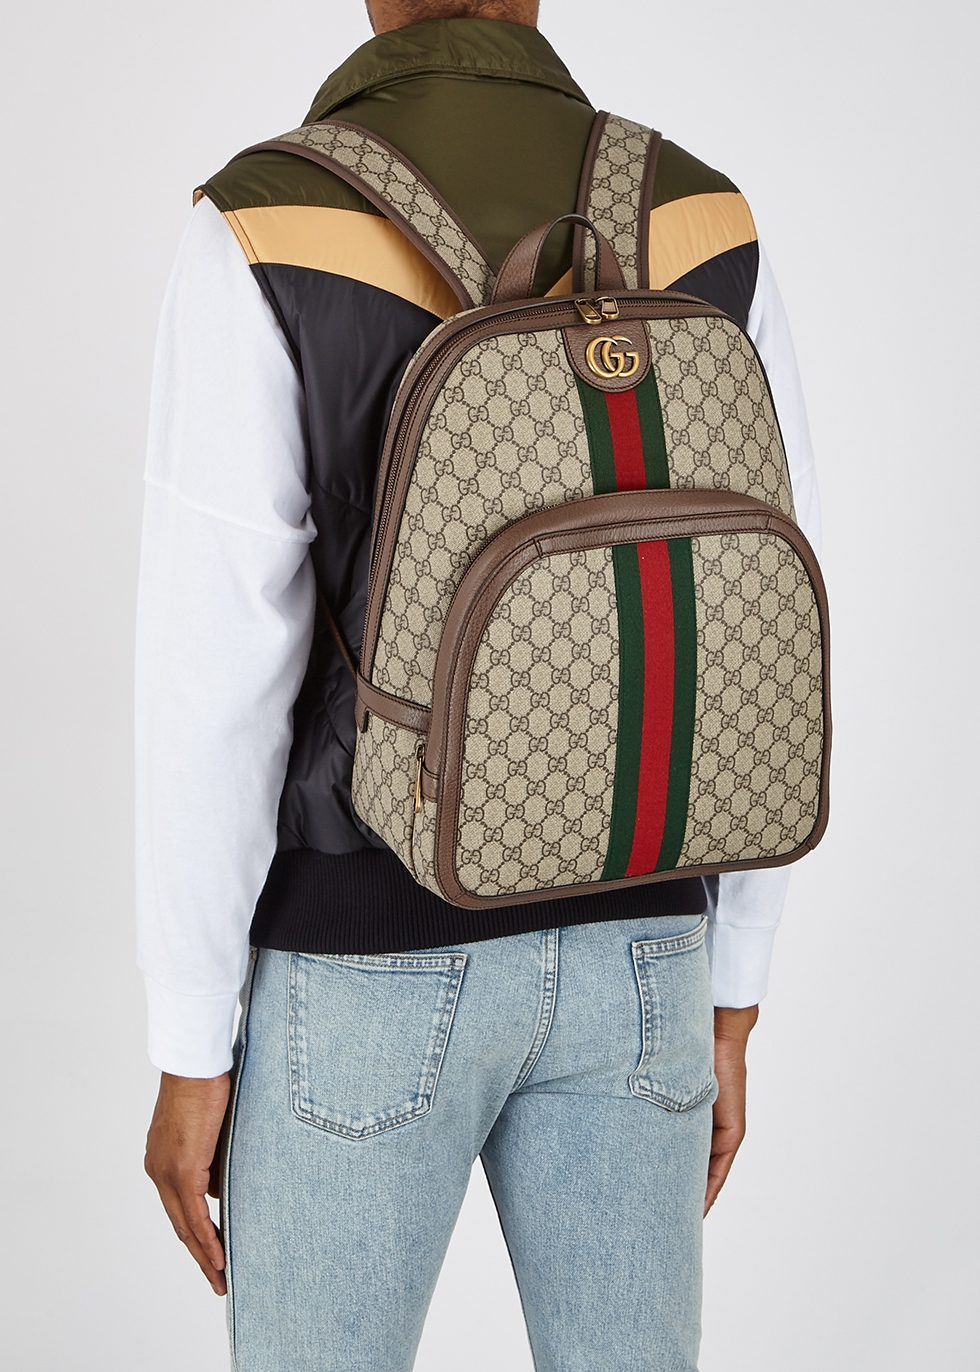 gucci ophidia gg medium backpack